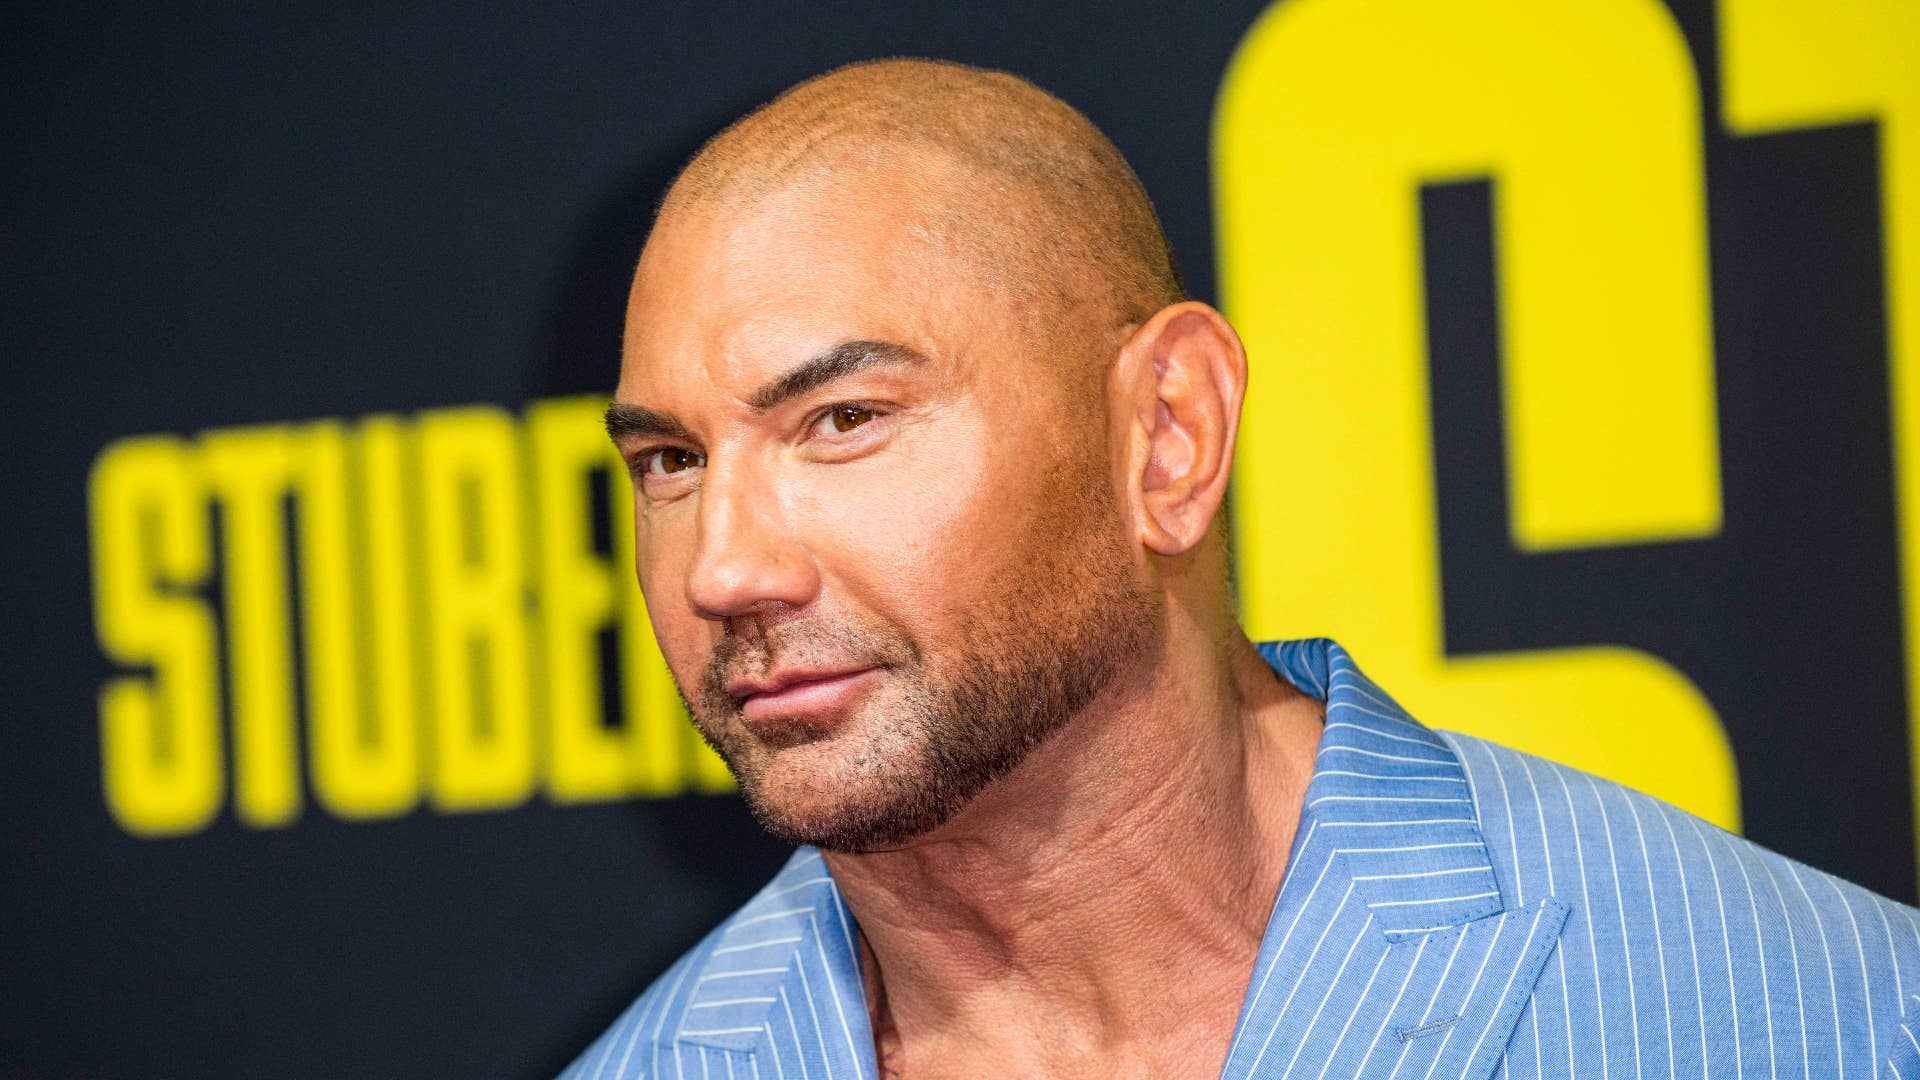 Dave Bautista arrives for the premiere of "Stuber."